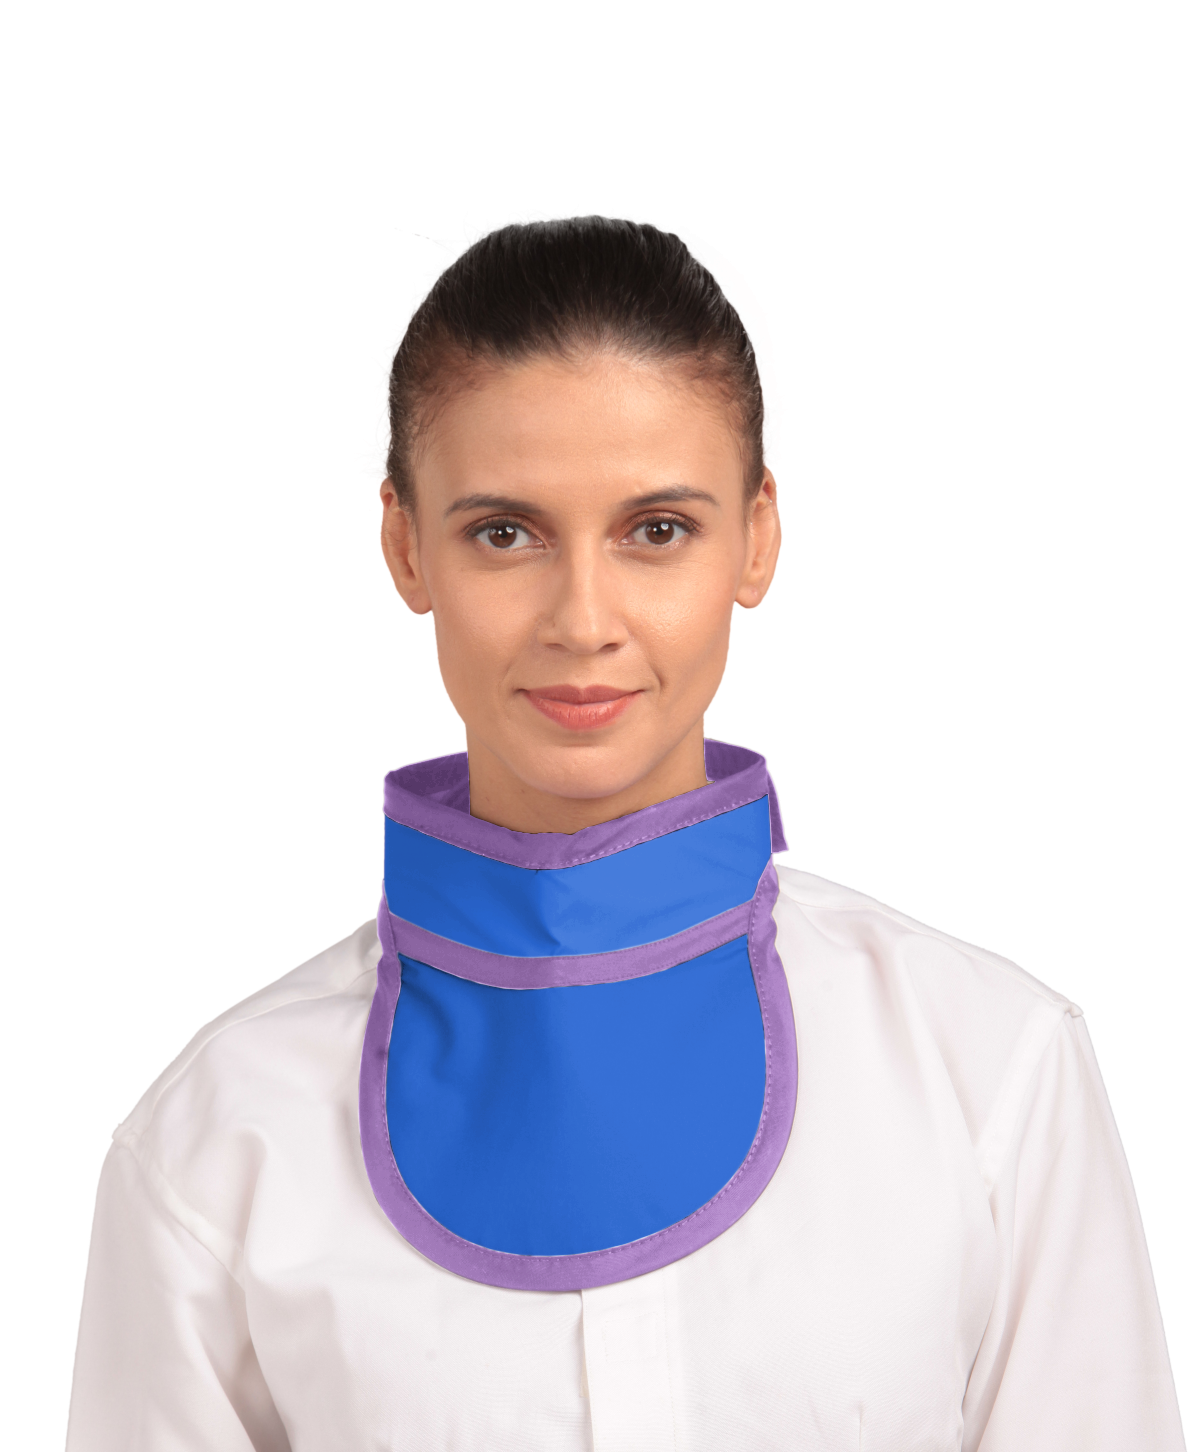 Frontal view of a female model wearing an electric blue colored thyroid collar “Slim” lined with lilac color around the outer edges.